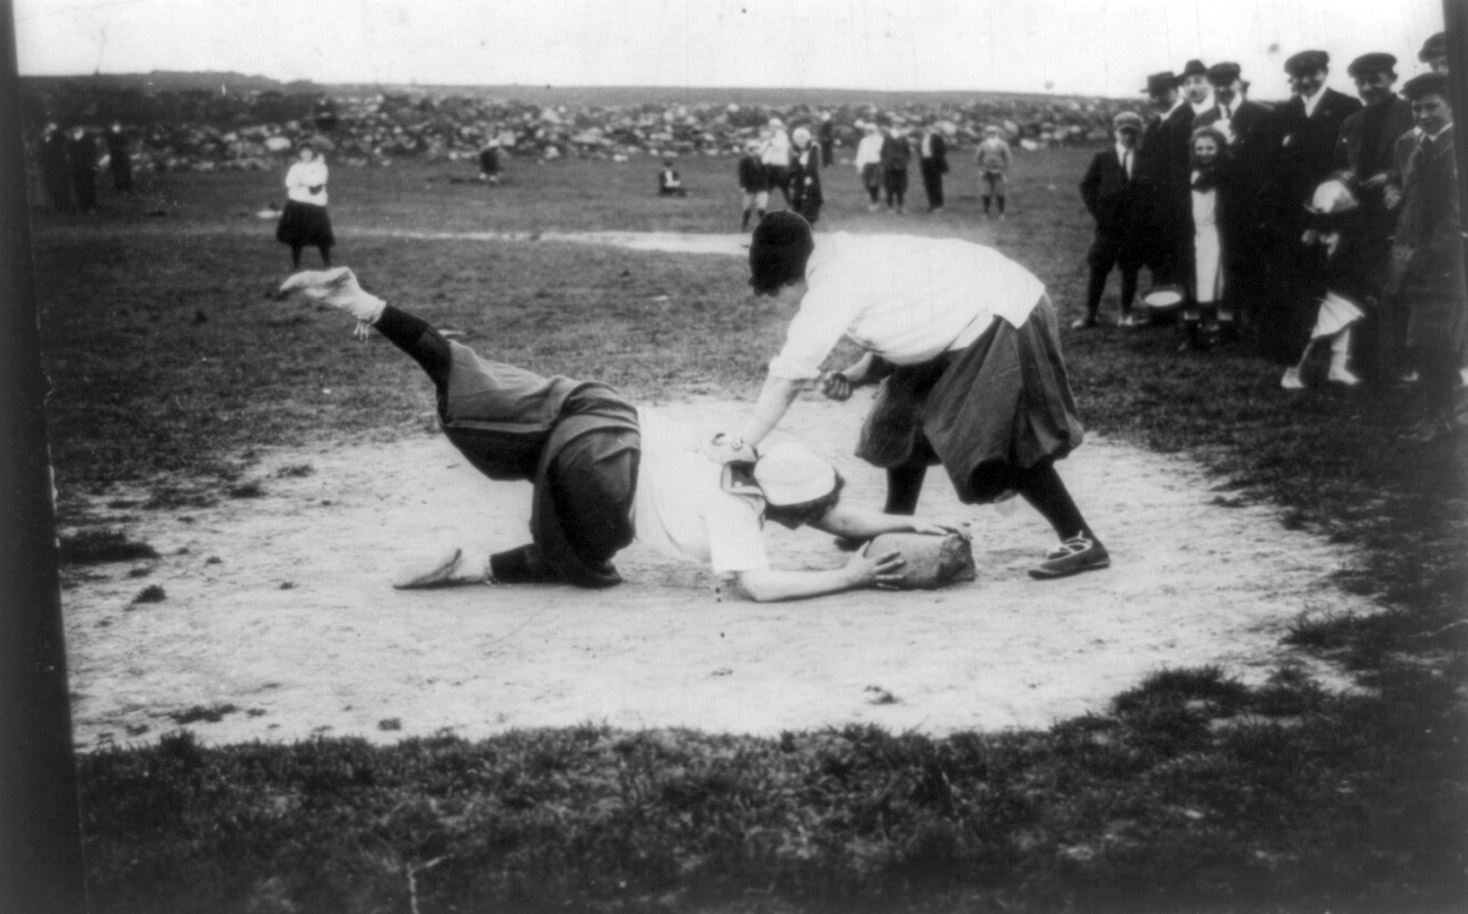 Miss Schnall sliding to first. Miss Morgan on bag. The New York Female Giants, circa 1913.